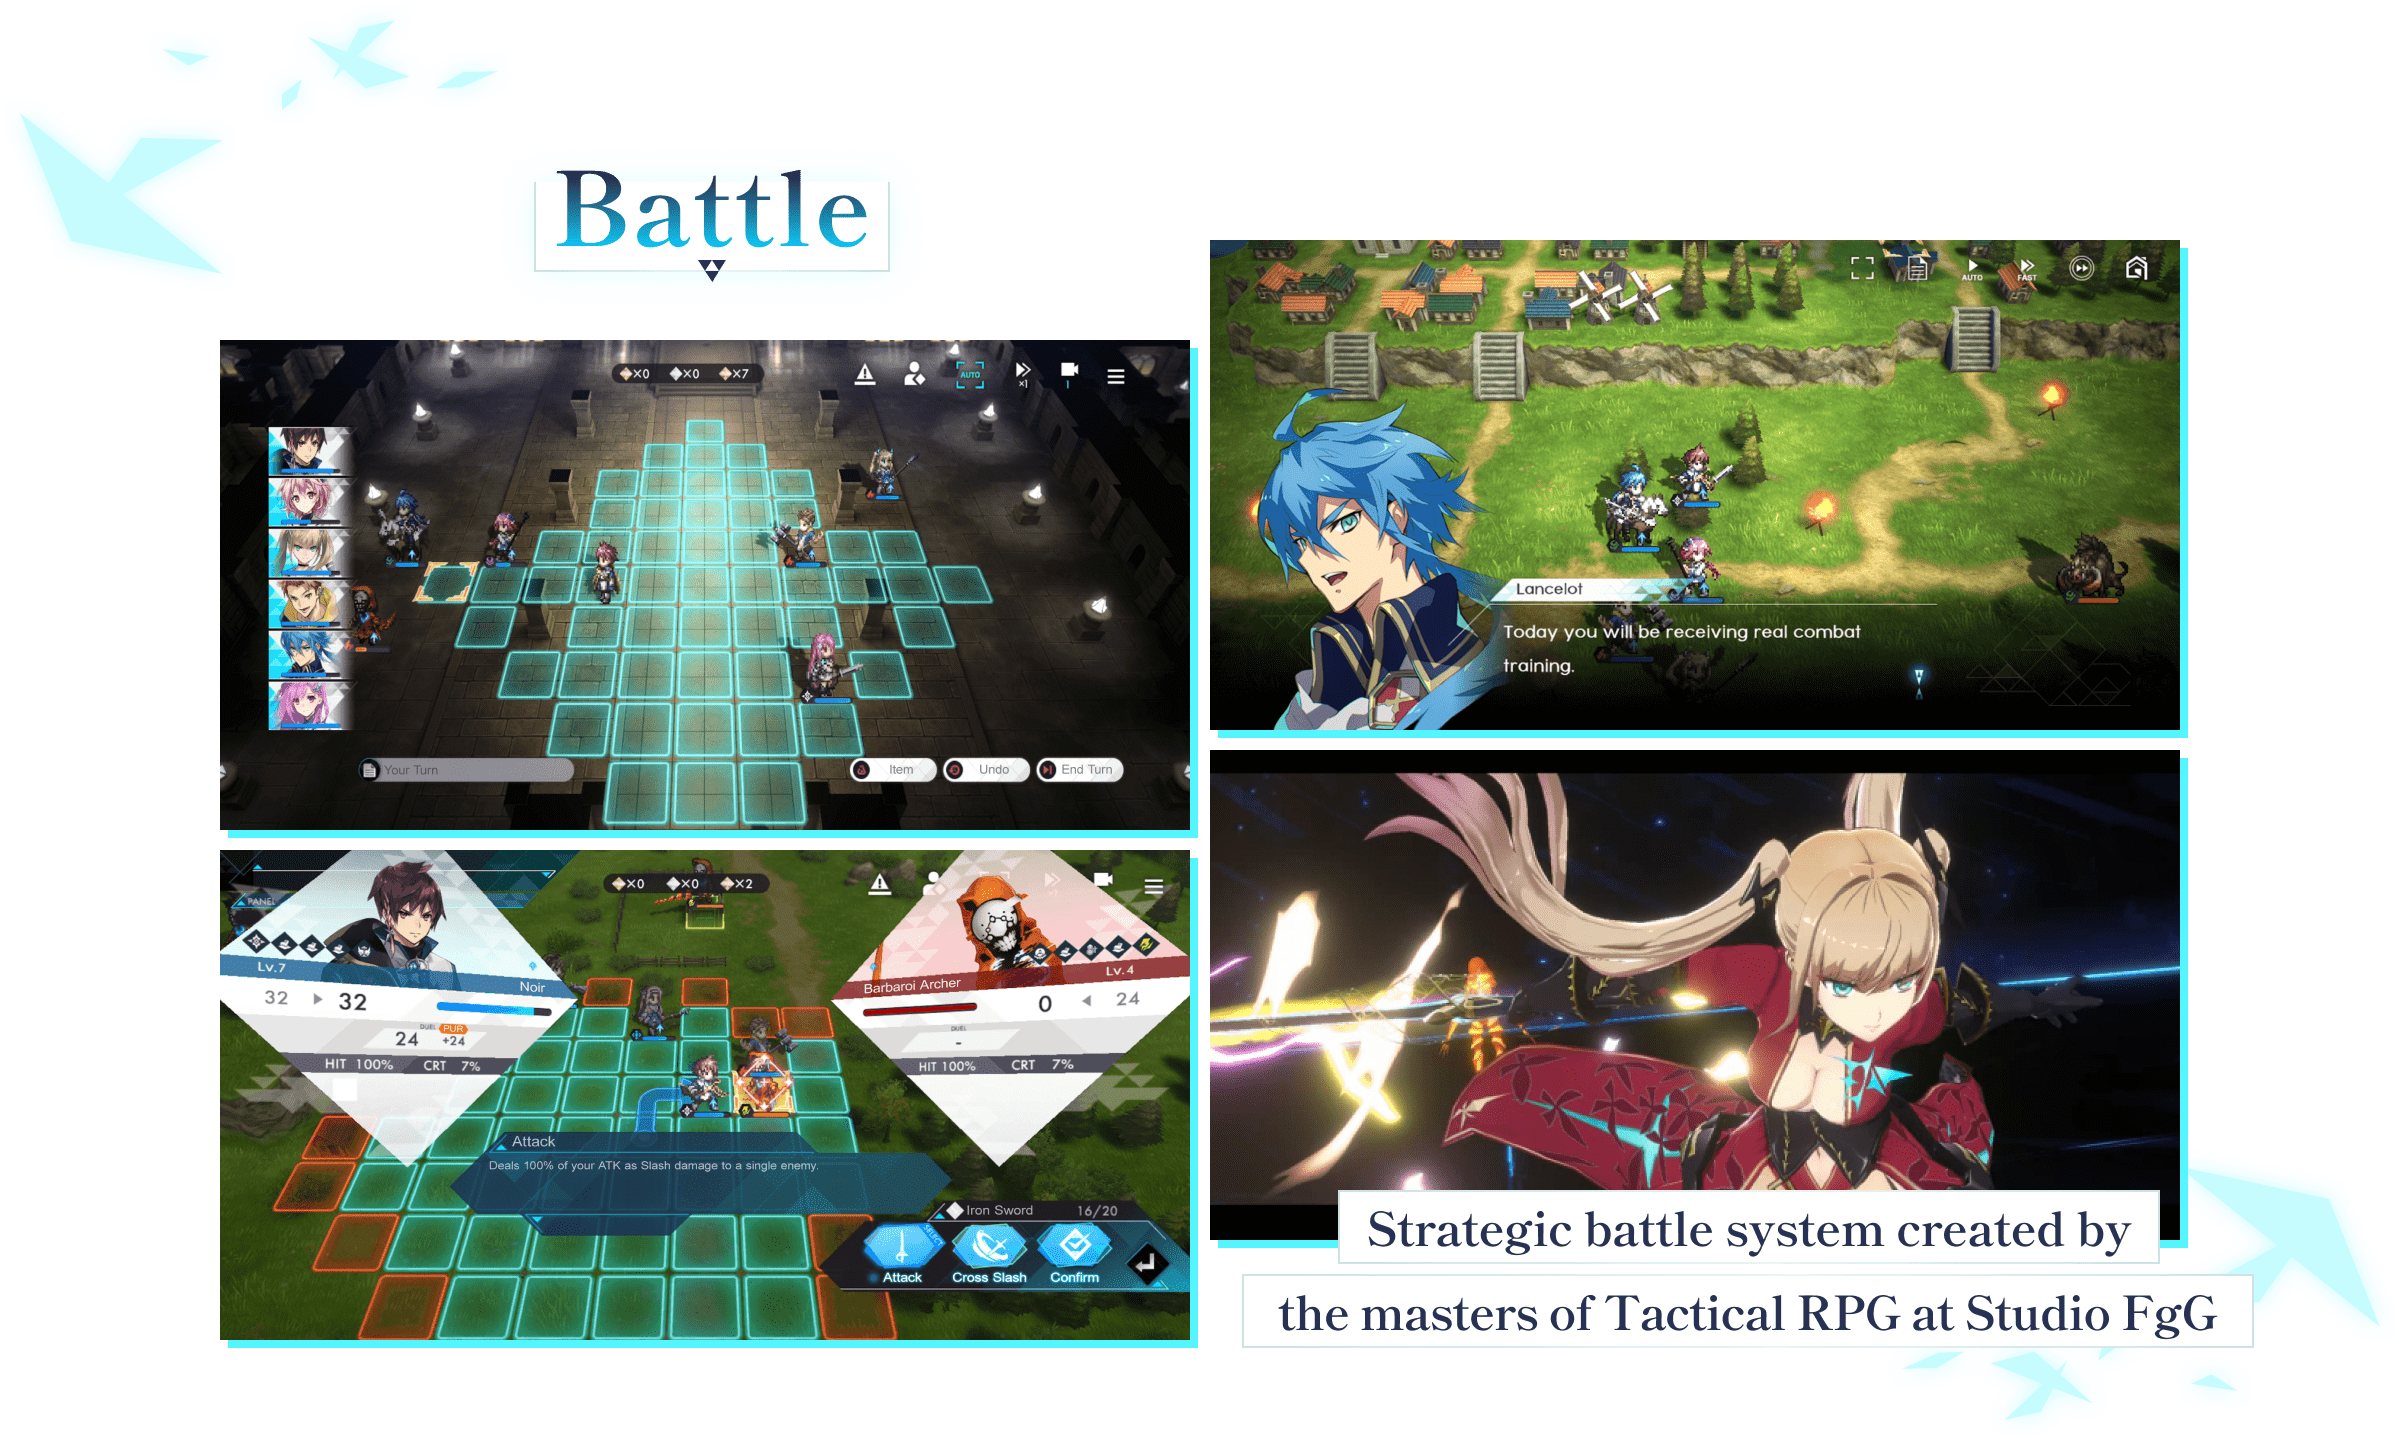 Strategic battle system created by the masters of Tactical RPG at Studio FgG